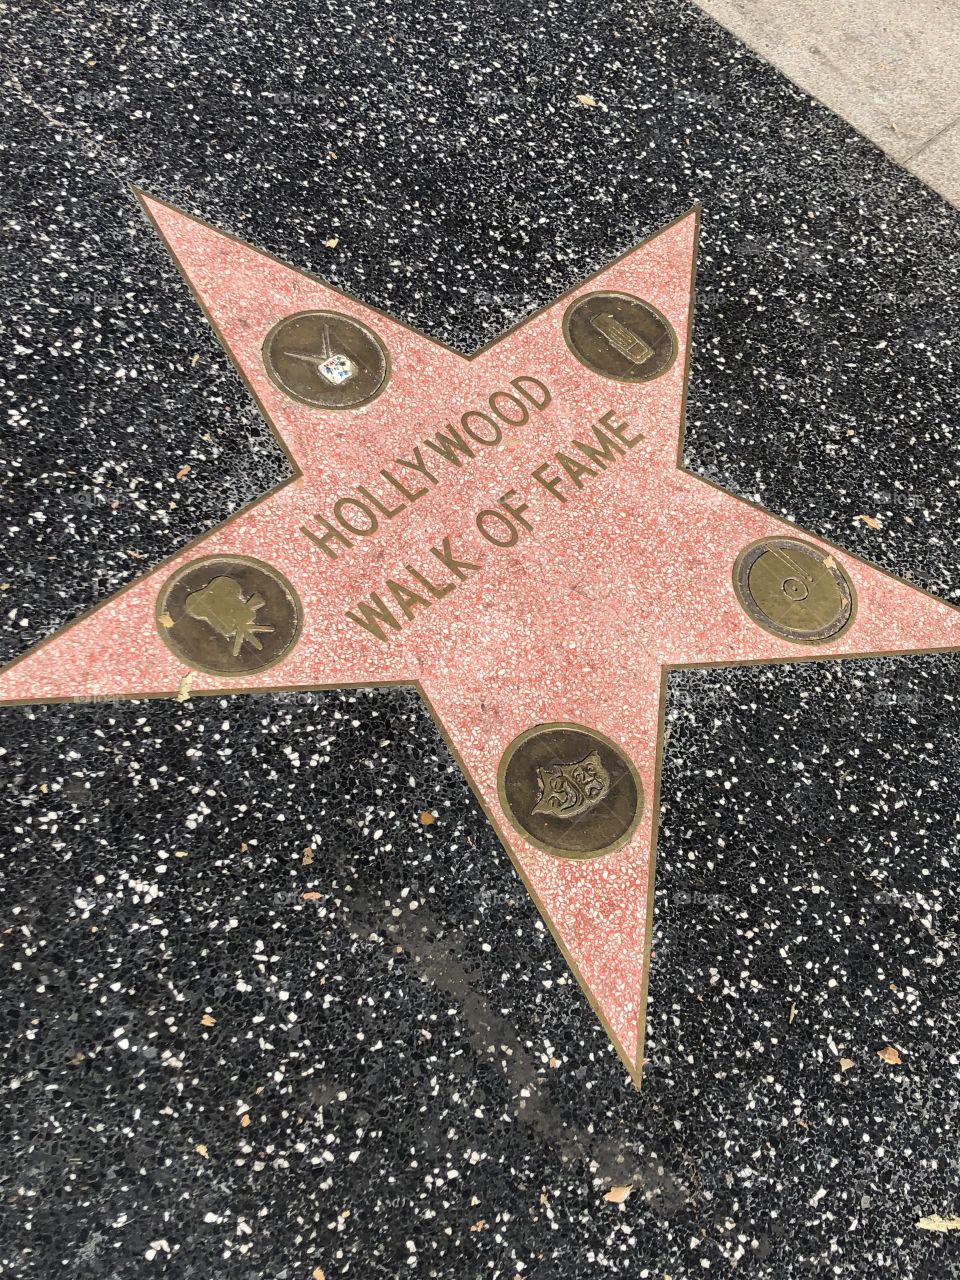 Strolling down the Hollywood Walk of Fame